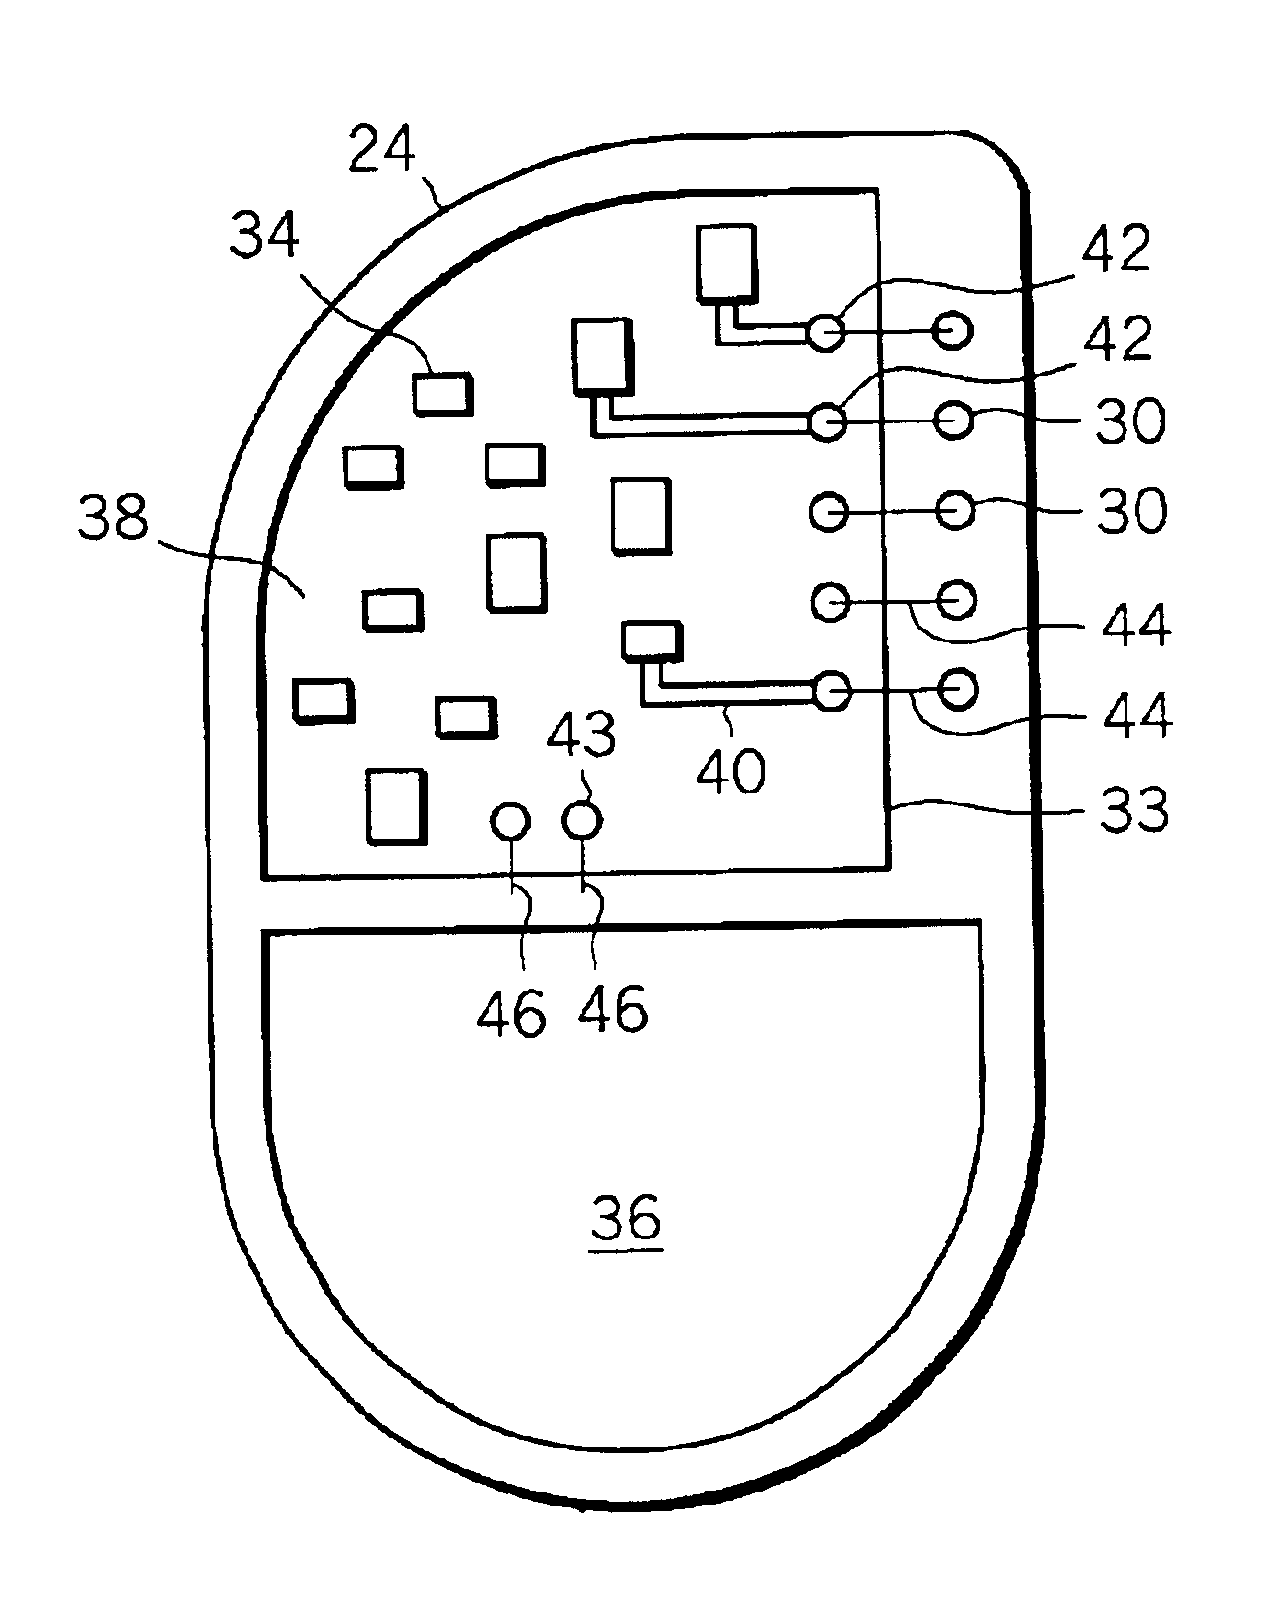 Implantable medical device including a surface-mount terminal array